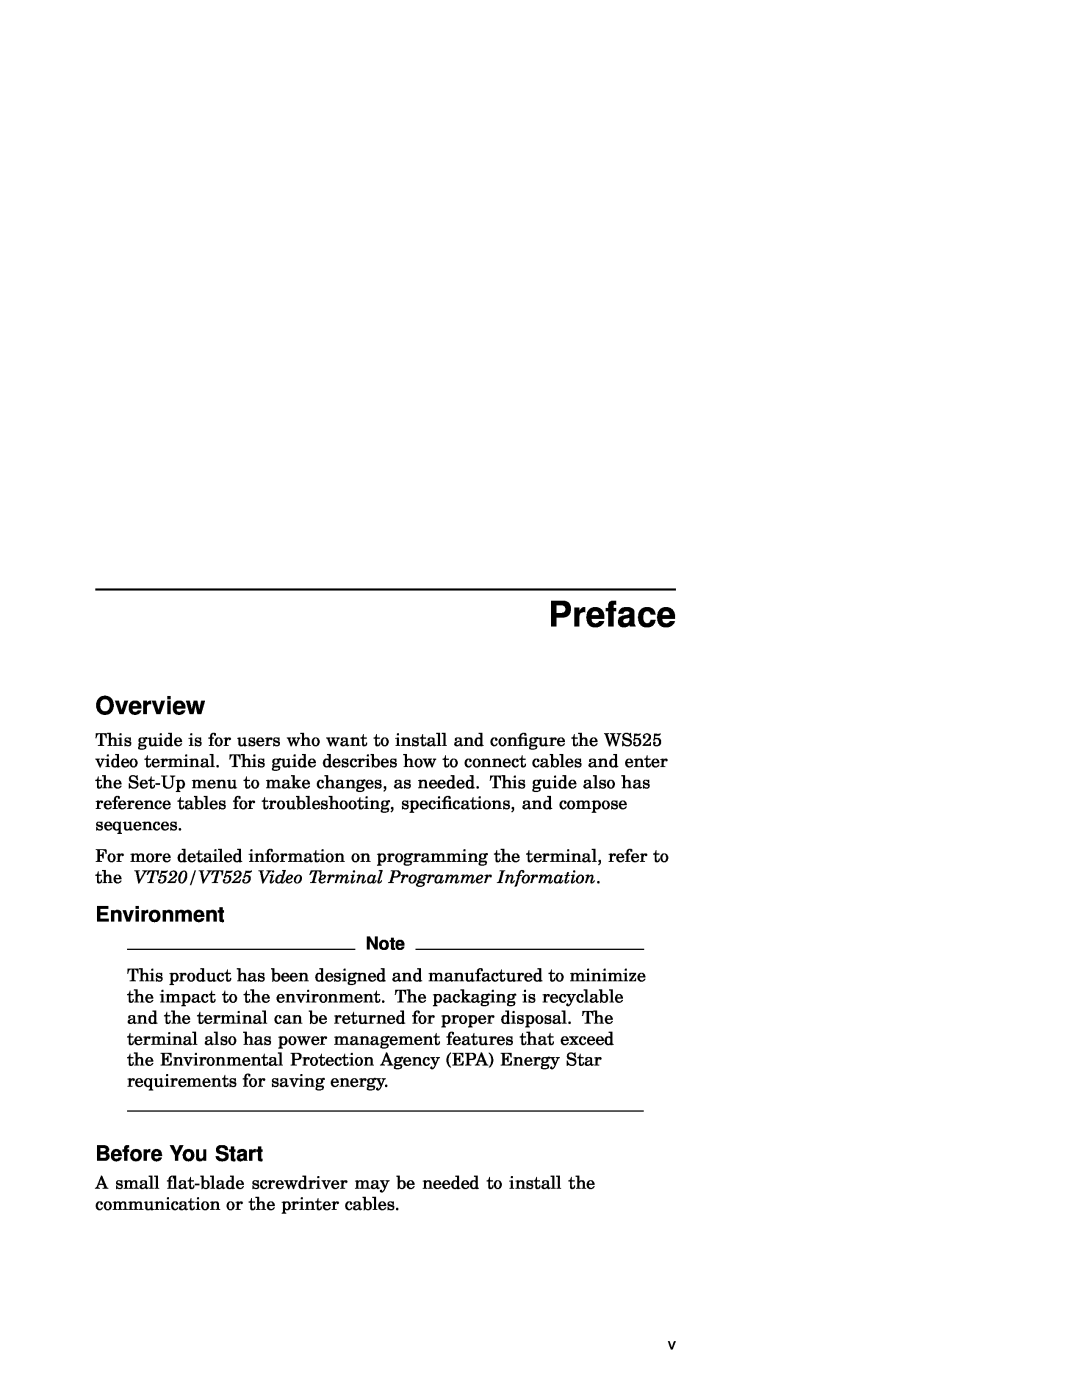 IBM WS525 manual Preface, Overview, Environment, Before You Start 